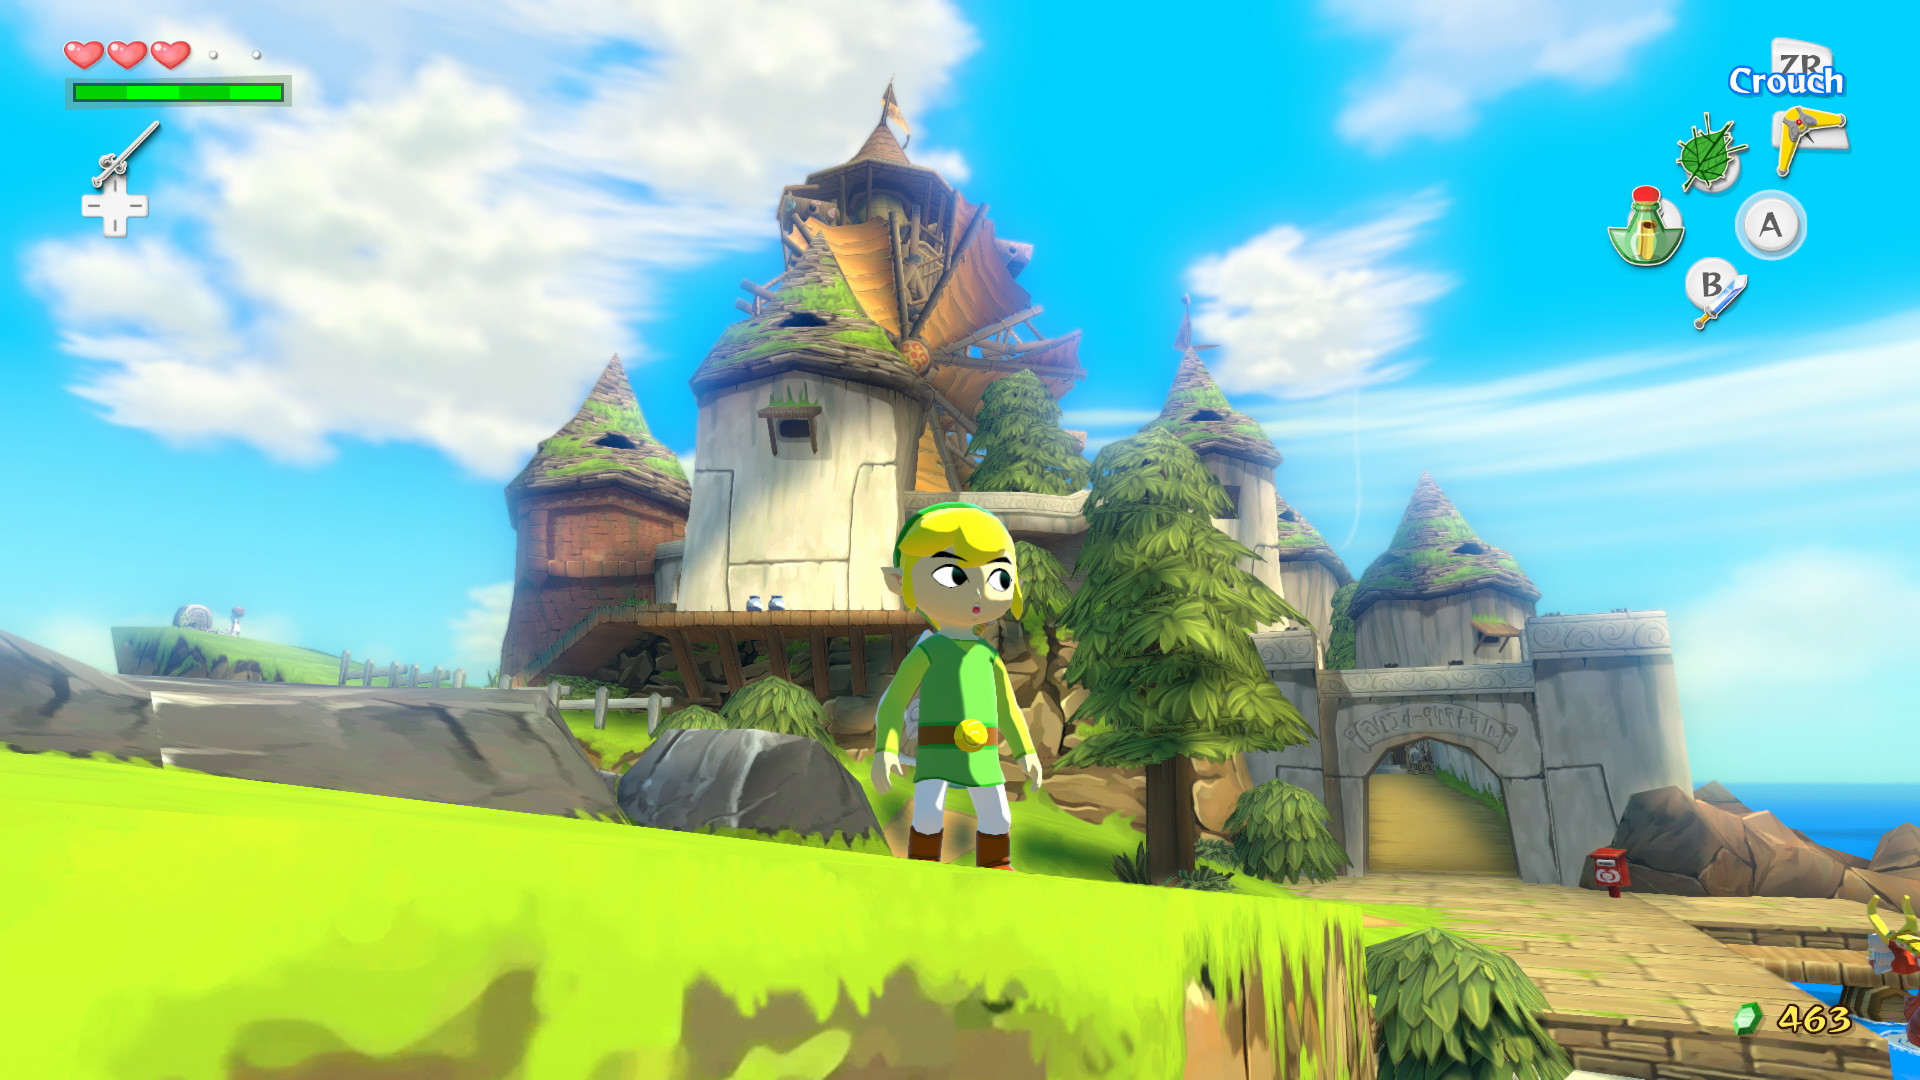 1920x1080 ... wallpapers; legend of zelda the wind waker hd ot tingling with hd ...